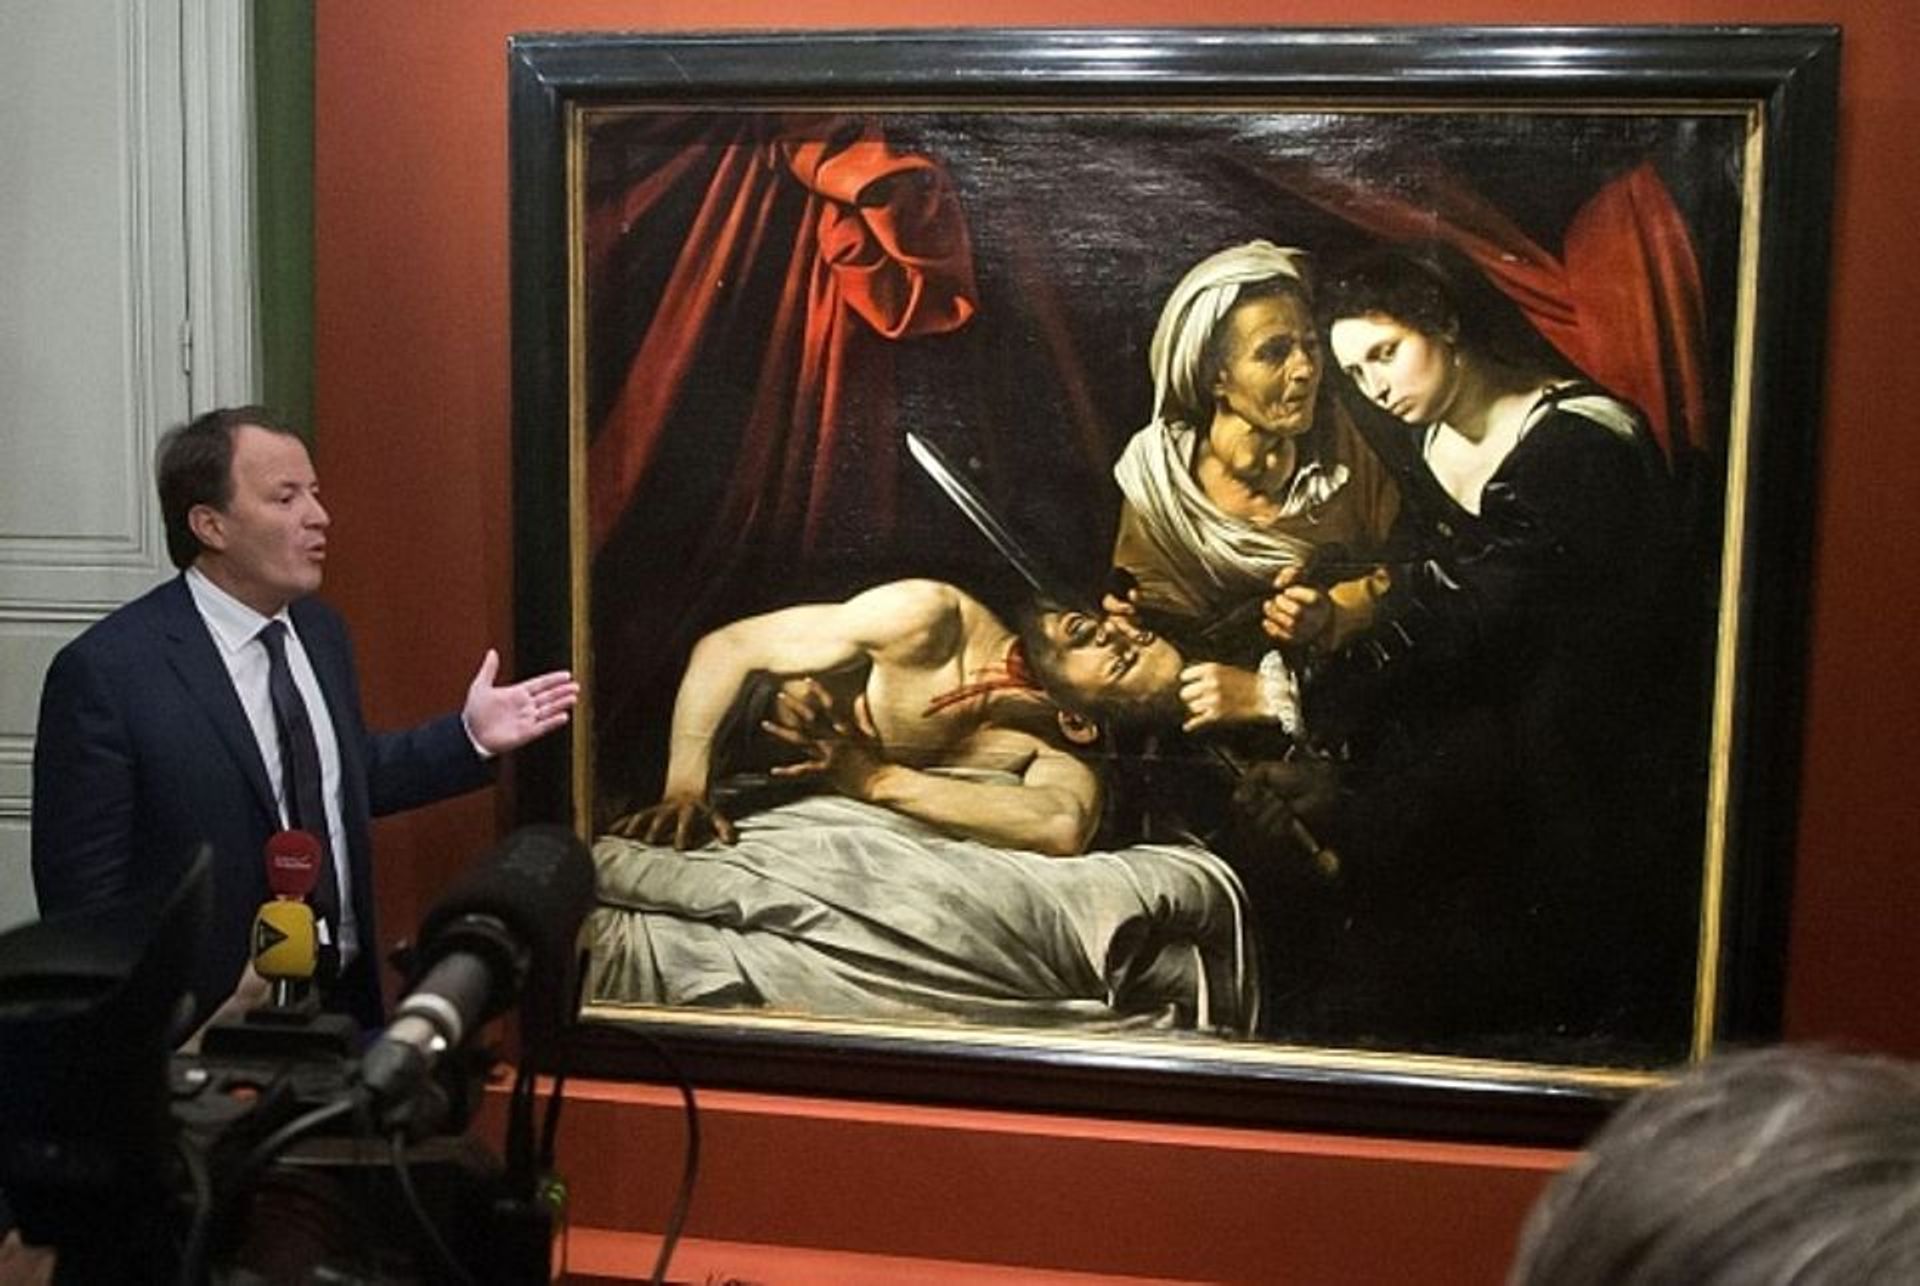 The painting was thought to be another version of Caravaggio's work depicting Judith beheading Holofernes AP Photo/Michel Euler